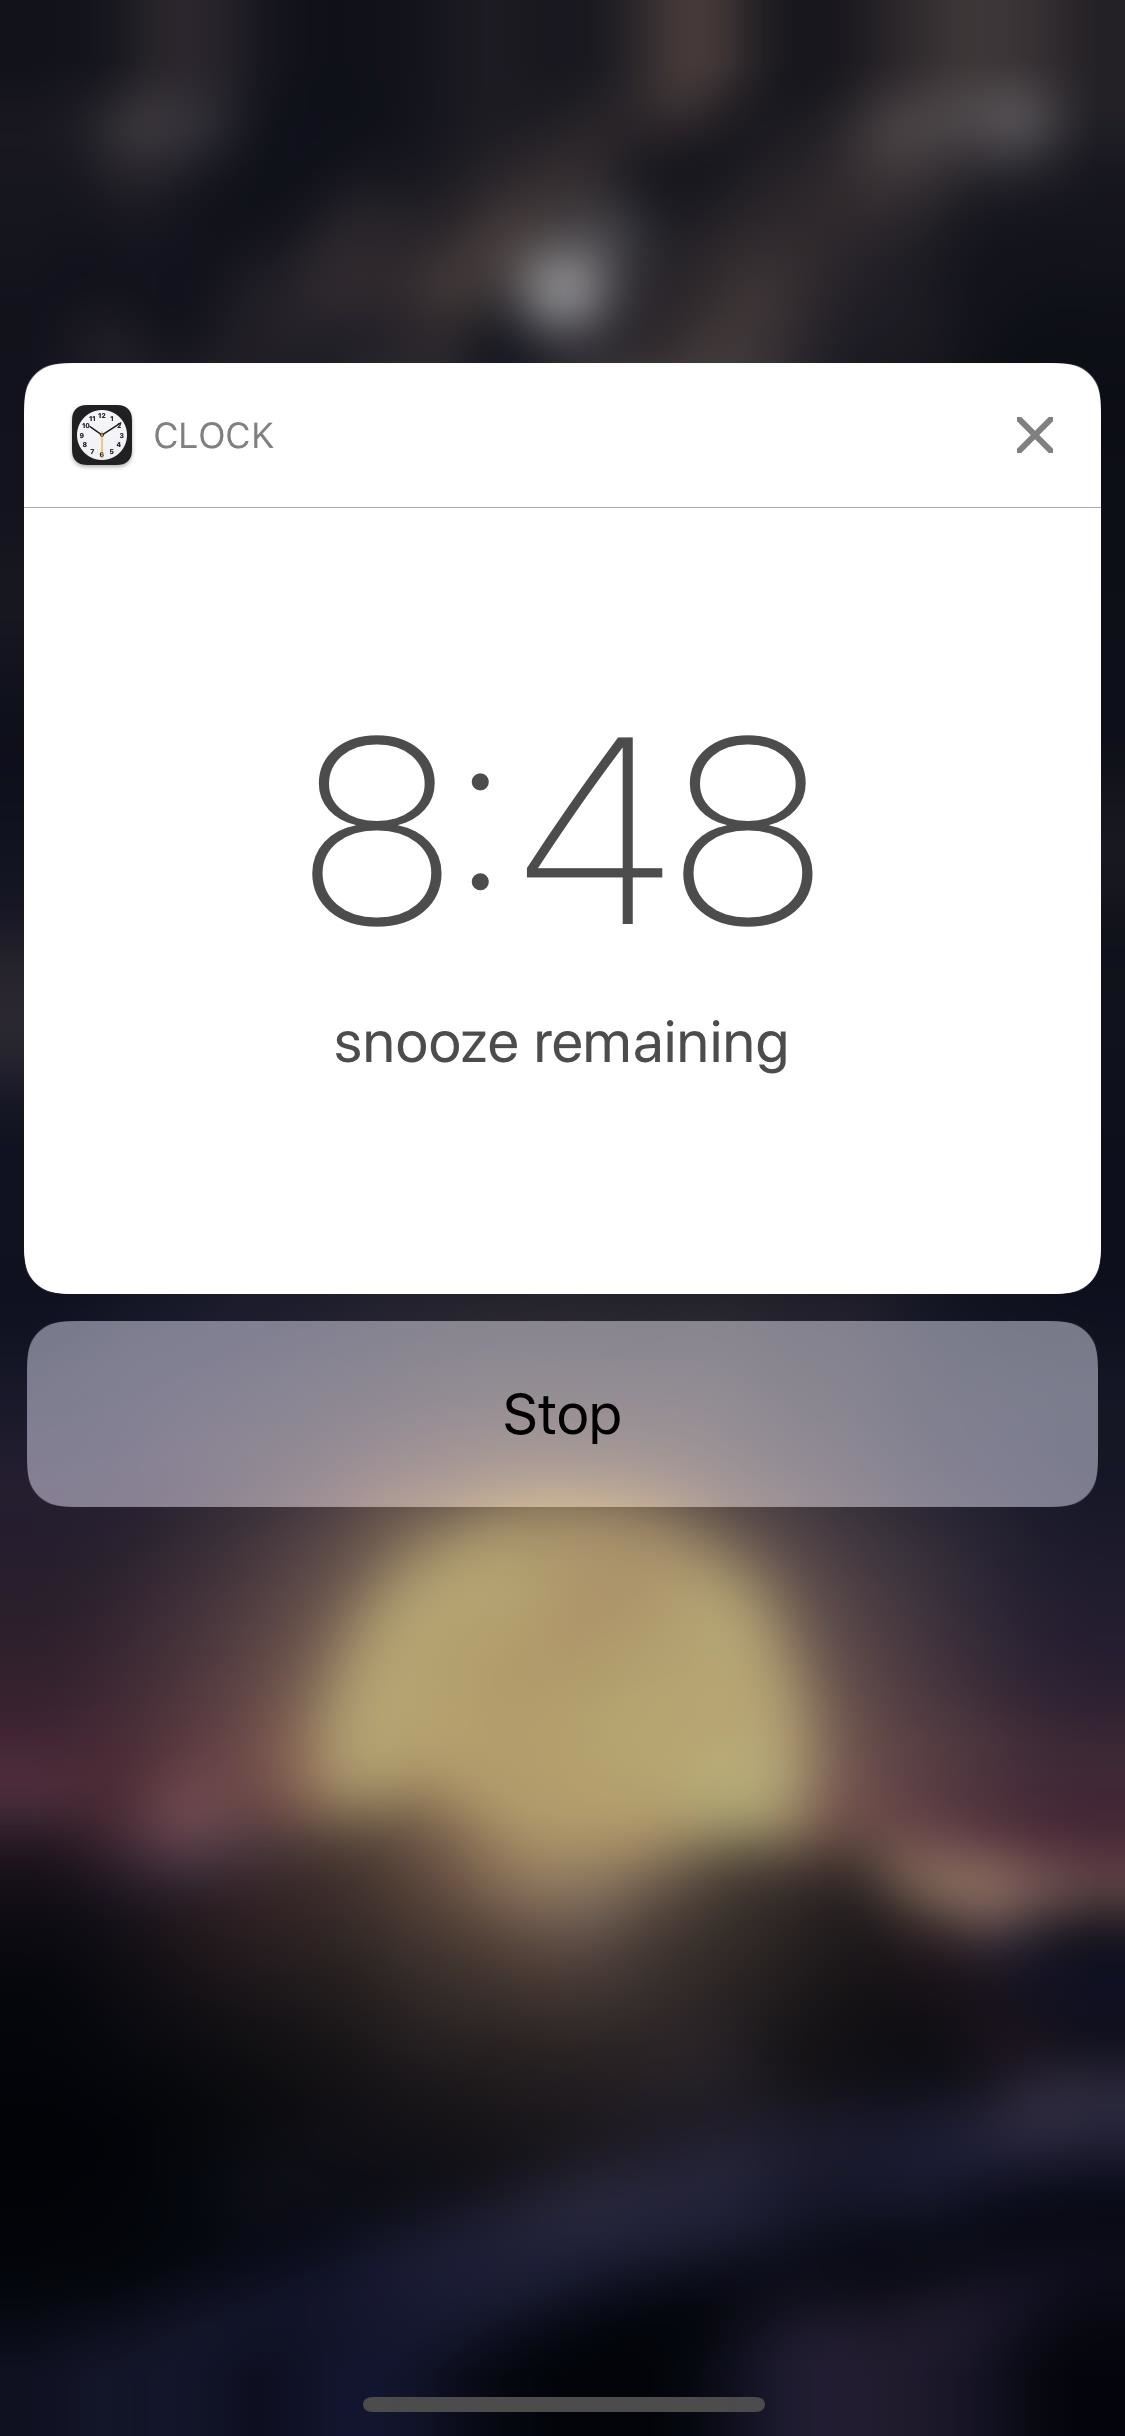 How to Change the Default Snooze Time on Your iPhone's Alarm